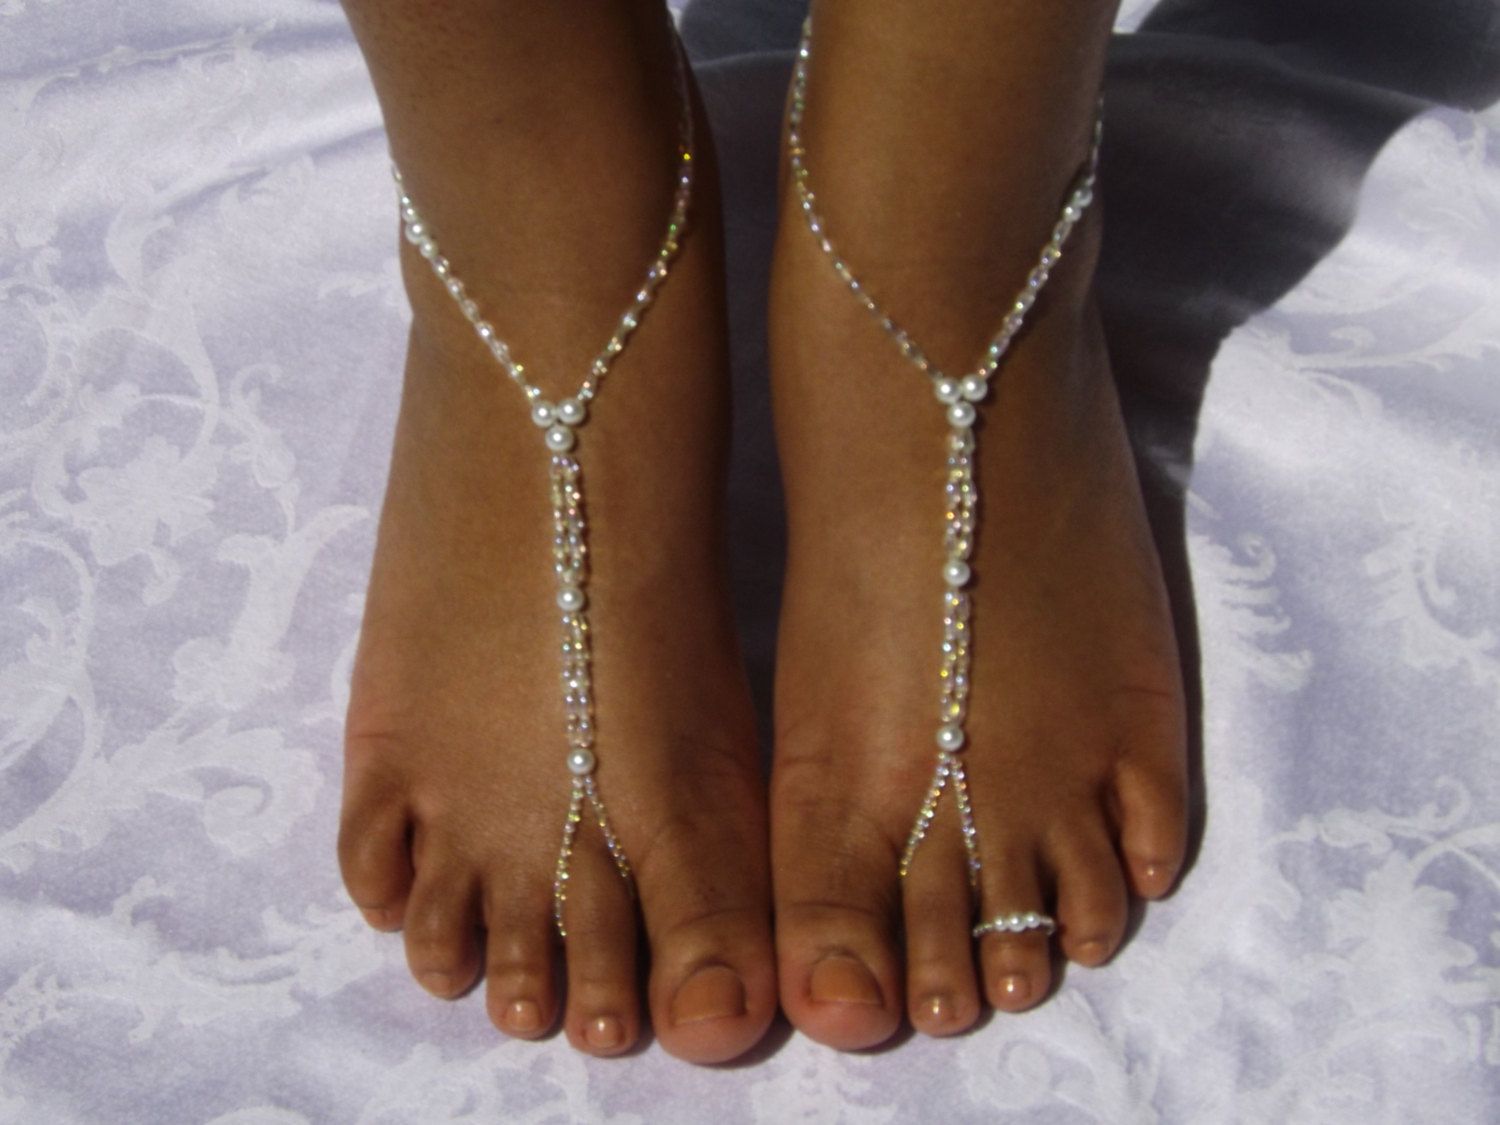 Beach Wedding Barefoot Sandals -   Foot Jewelry Ideas Collection